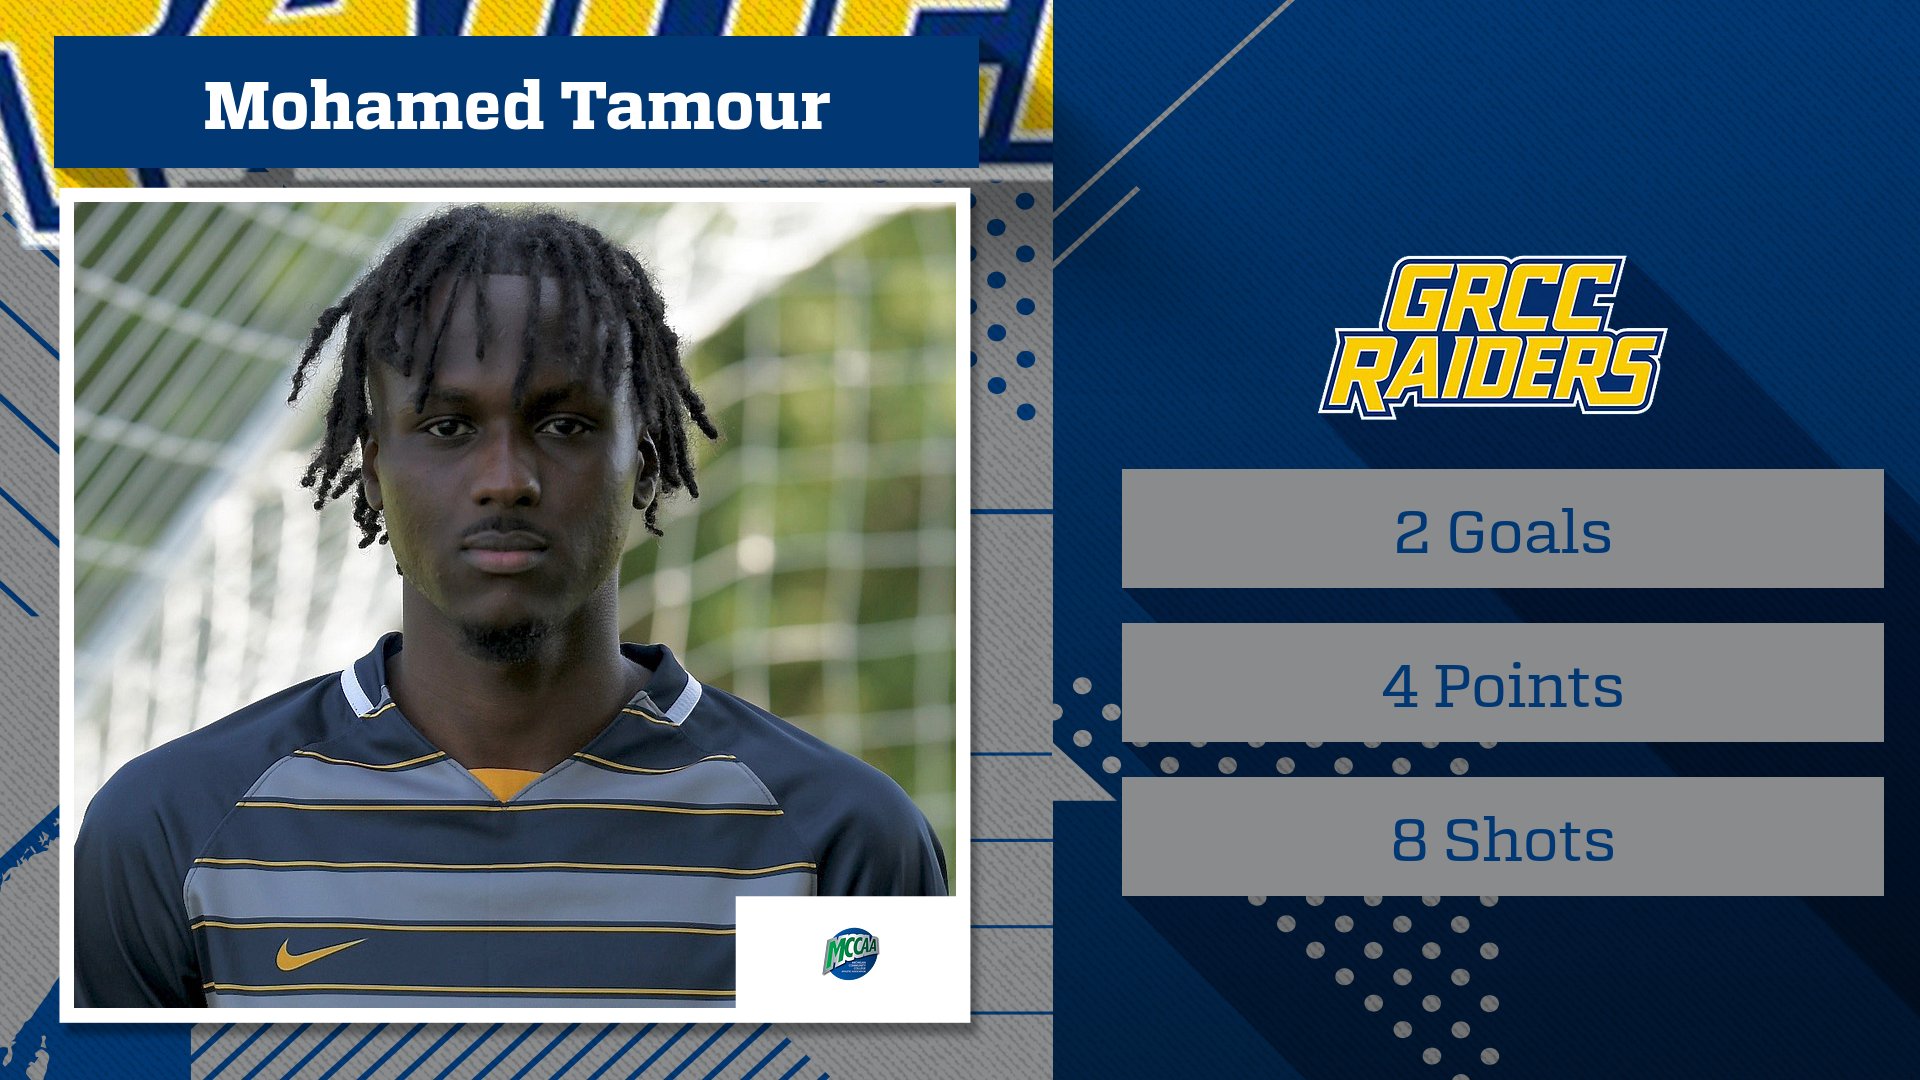 GRCC's Tamour Named MCCAA Men's Soccer Player of the Week#10